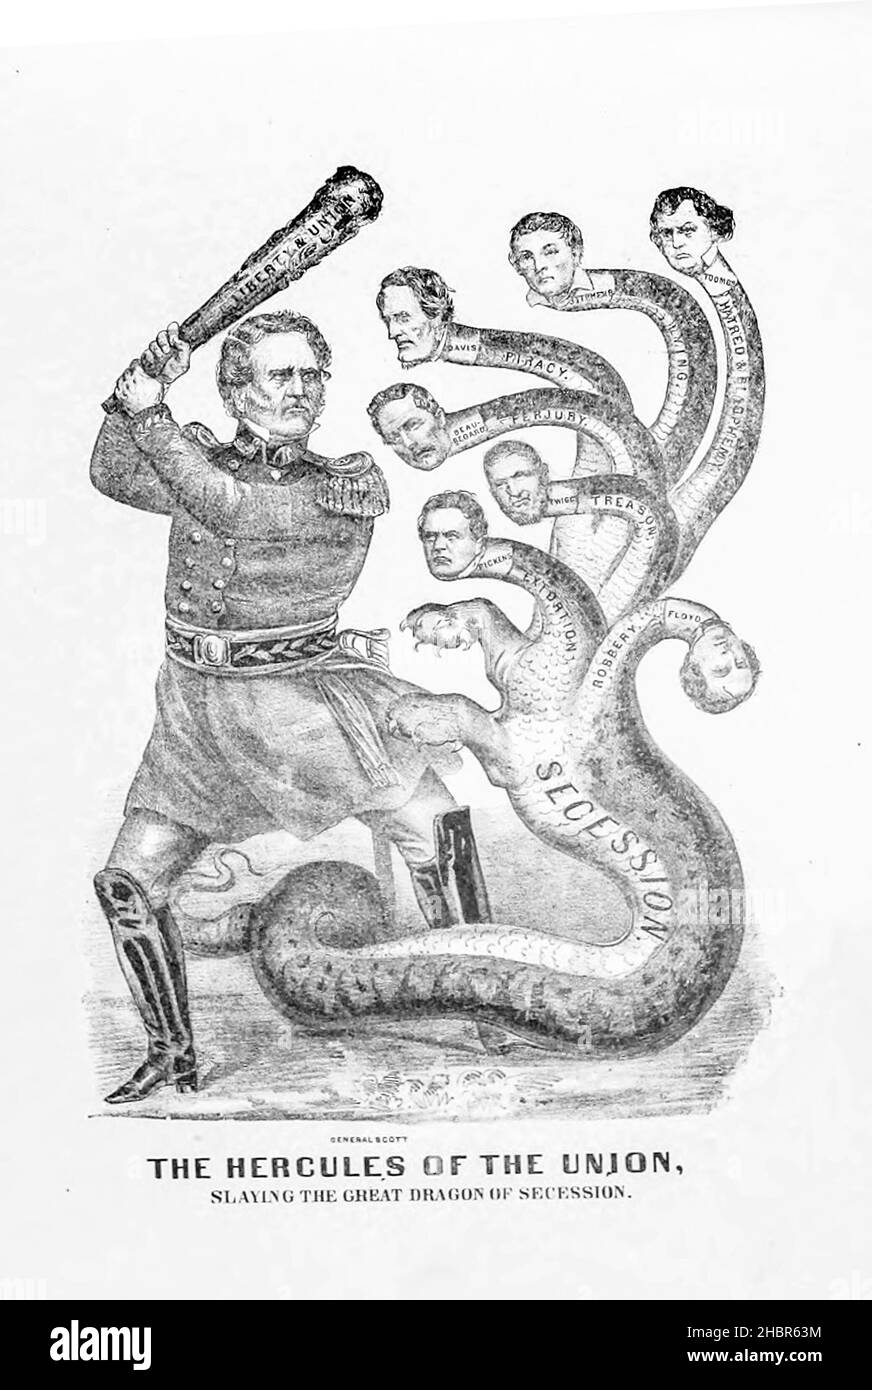 The Hercules of the Union Slaying the Dragon of Secession from a collection of Caricatures pertaining to the Civil War published in 1892 on Heavy Plate Paper Stock Photo